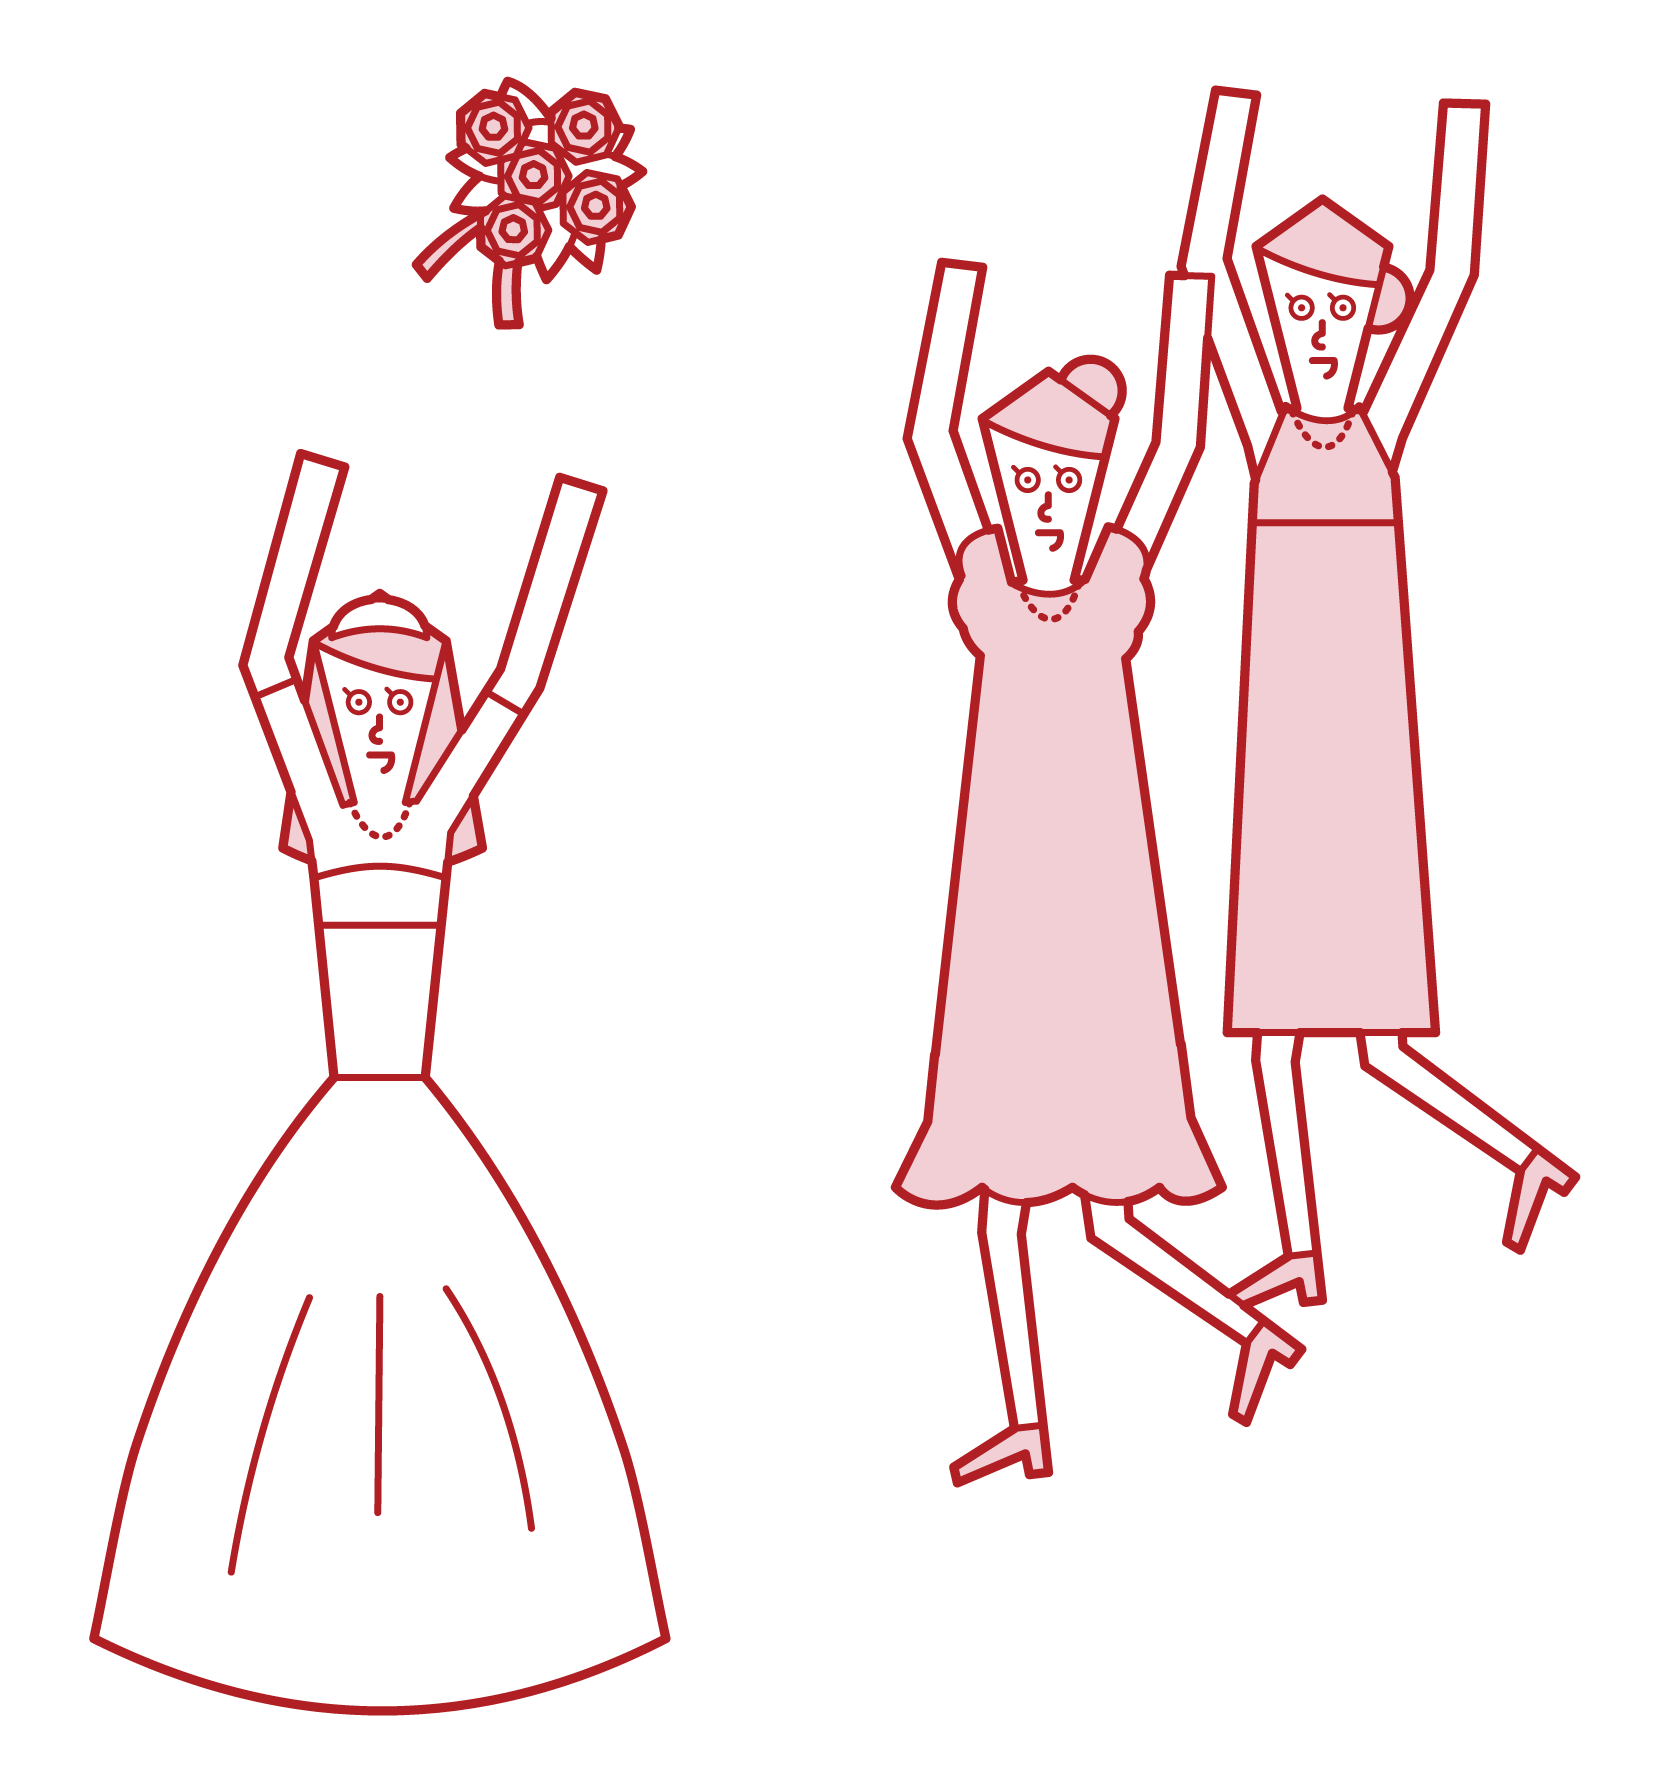 Illustration of a bouquettos person (woman)